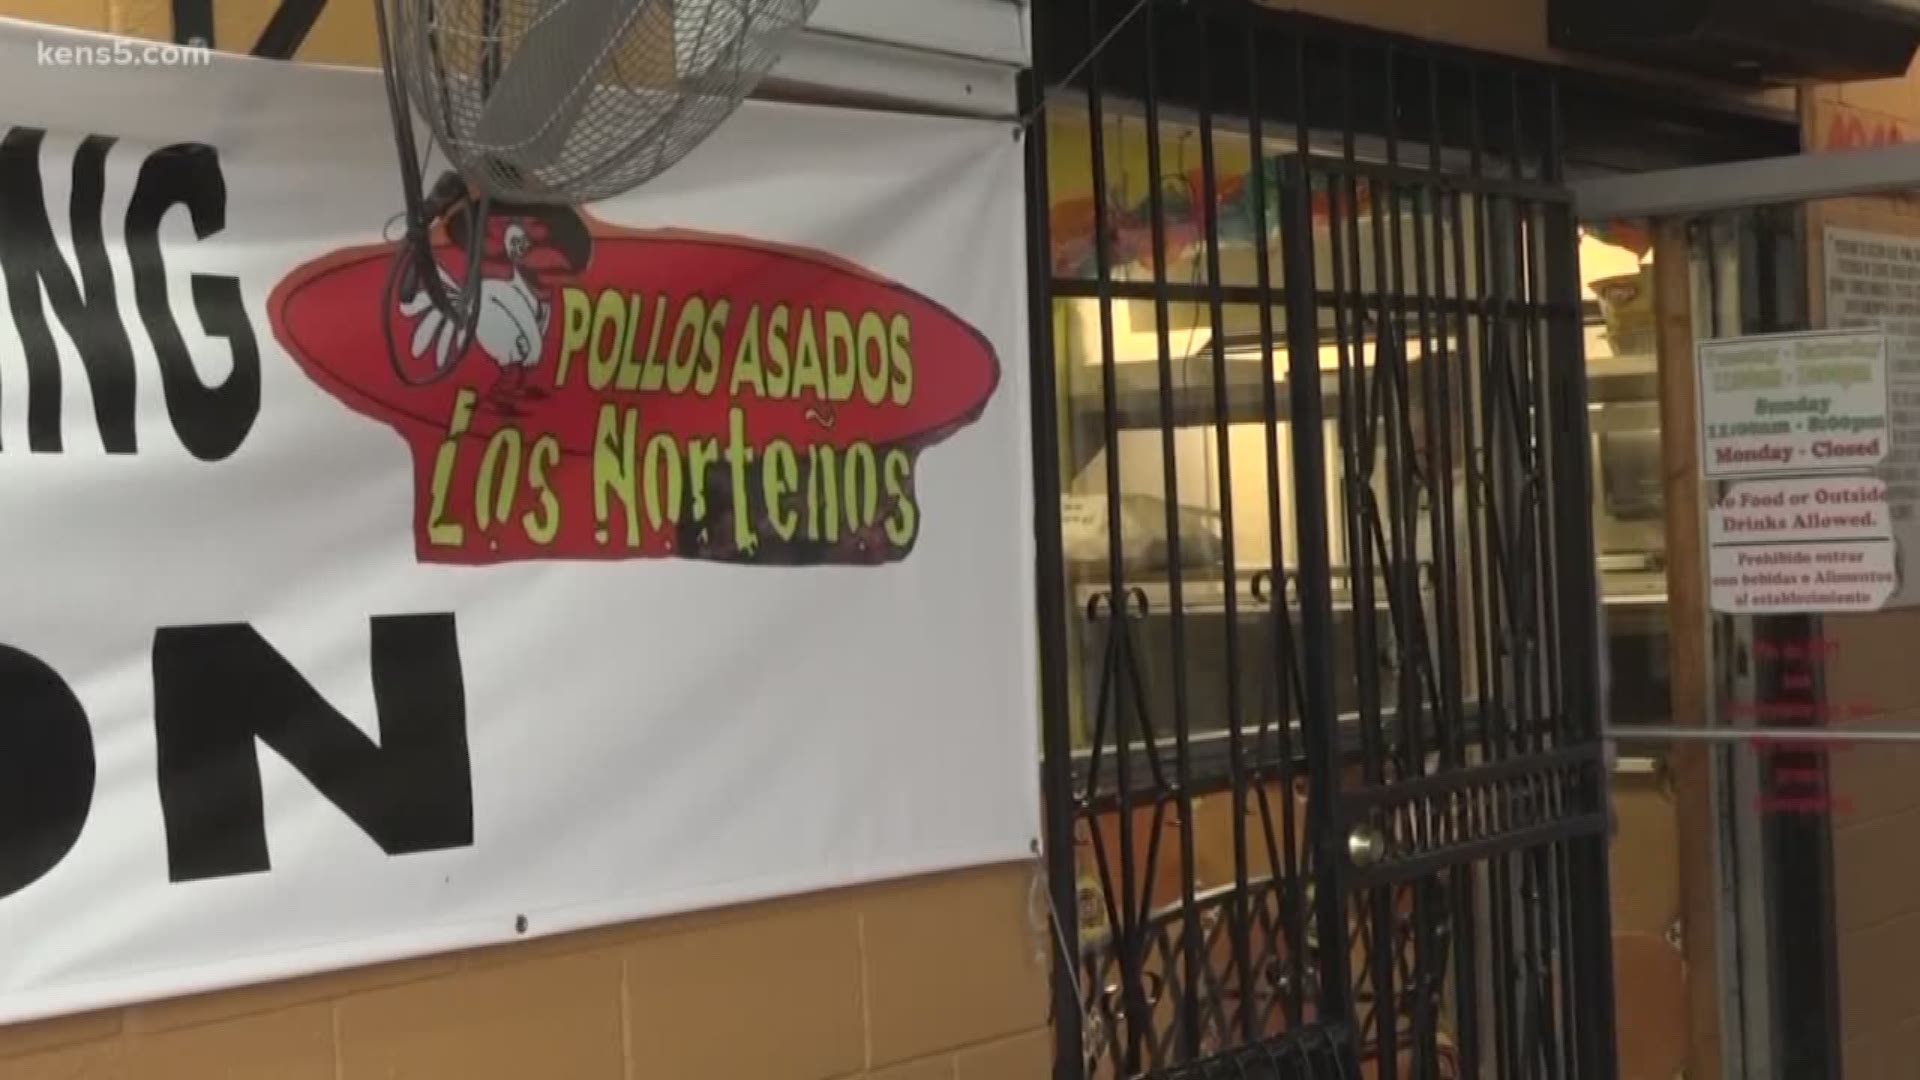 Pollos Asados Los Nortenos, a popular southeast-side restaurant, is set to reopen after being shut down for seven months.